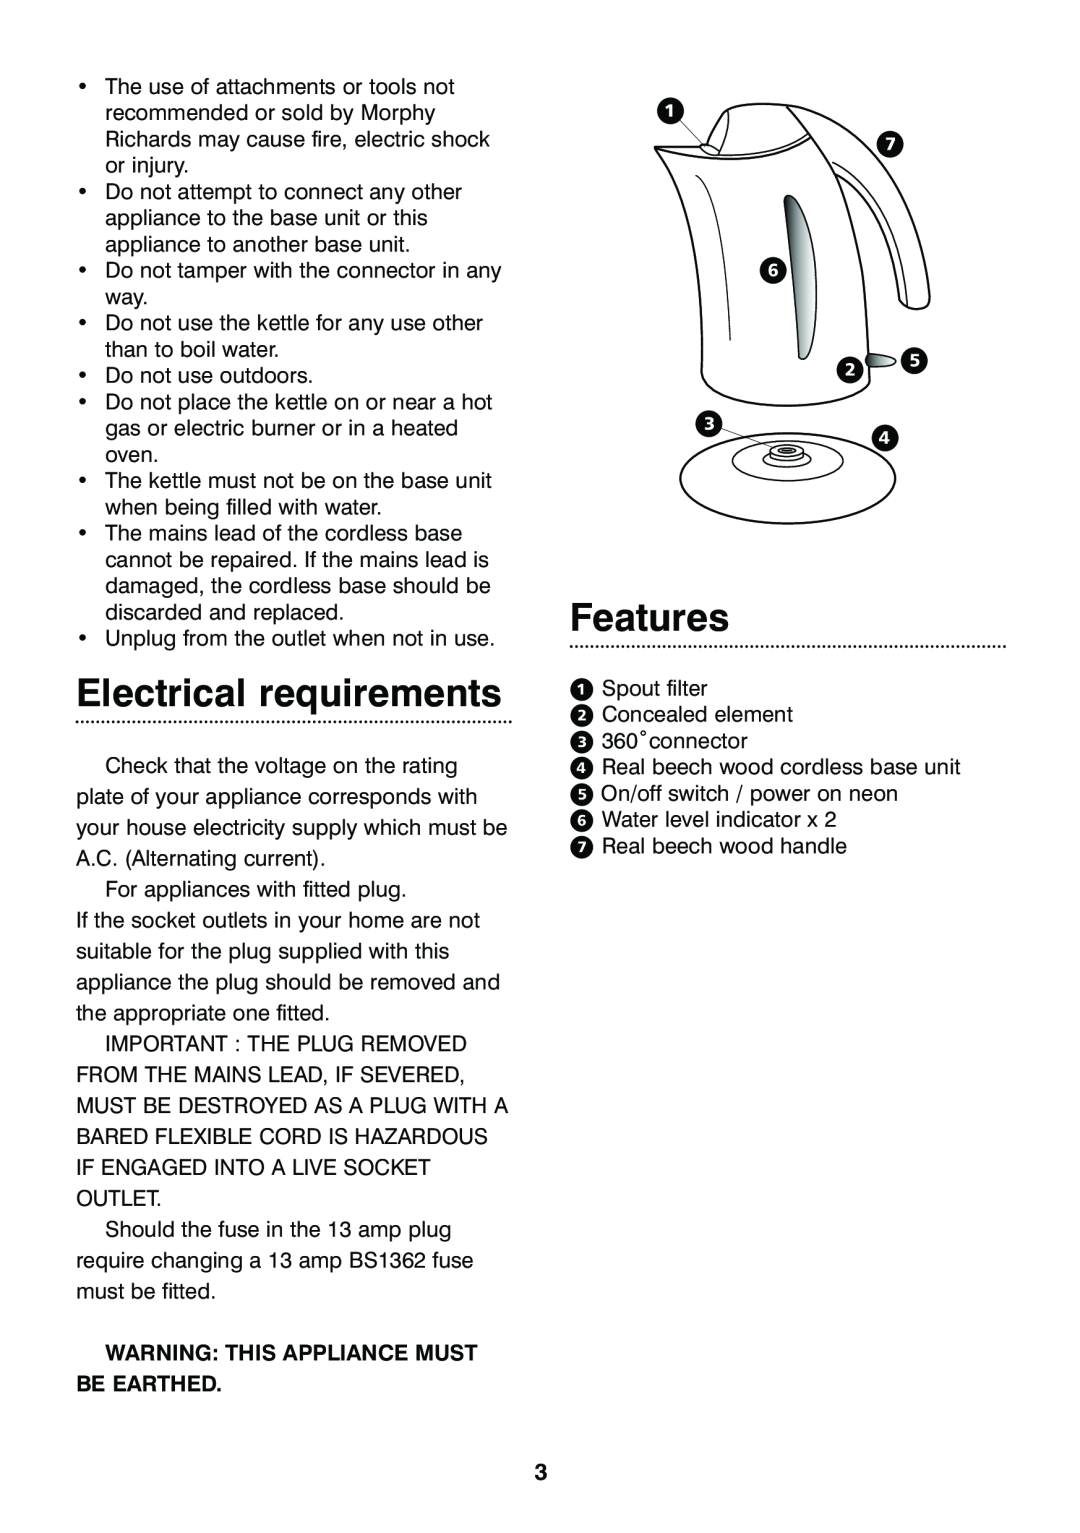 Morphy Richards Beech stainless steel kettle manual Electrical requirements, Features, ⁄ ‡ ﬂ ¤ﬁ ‹ › 